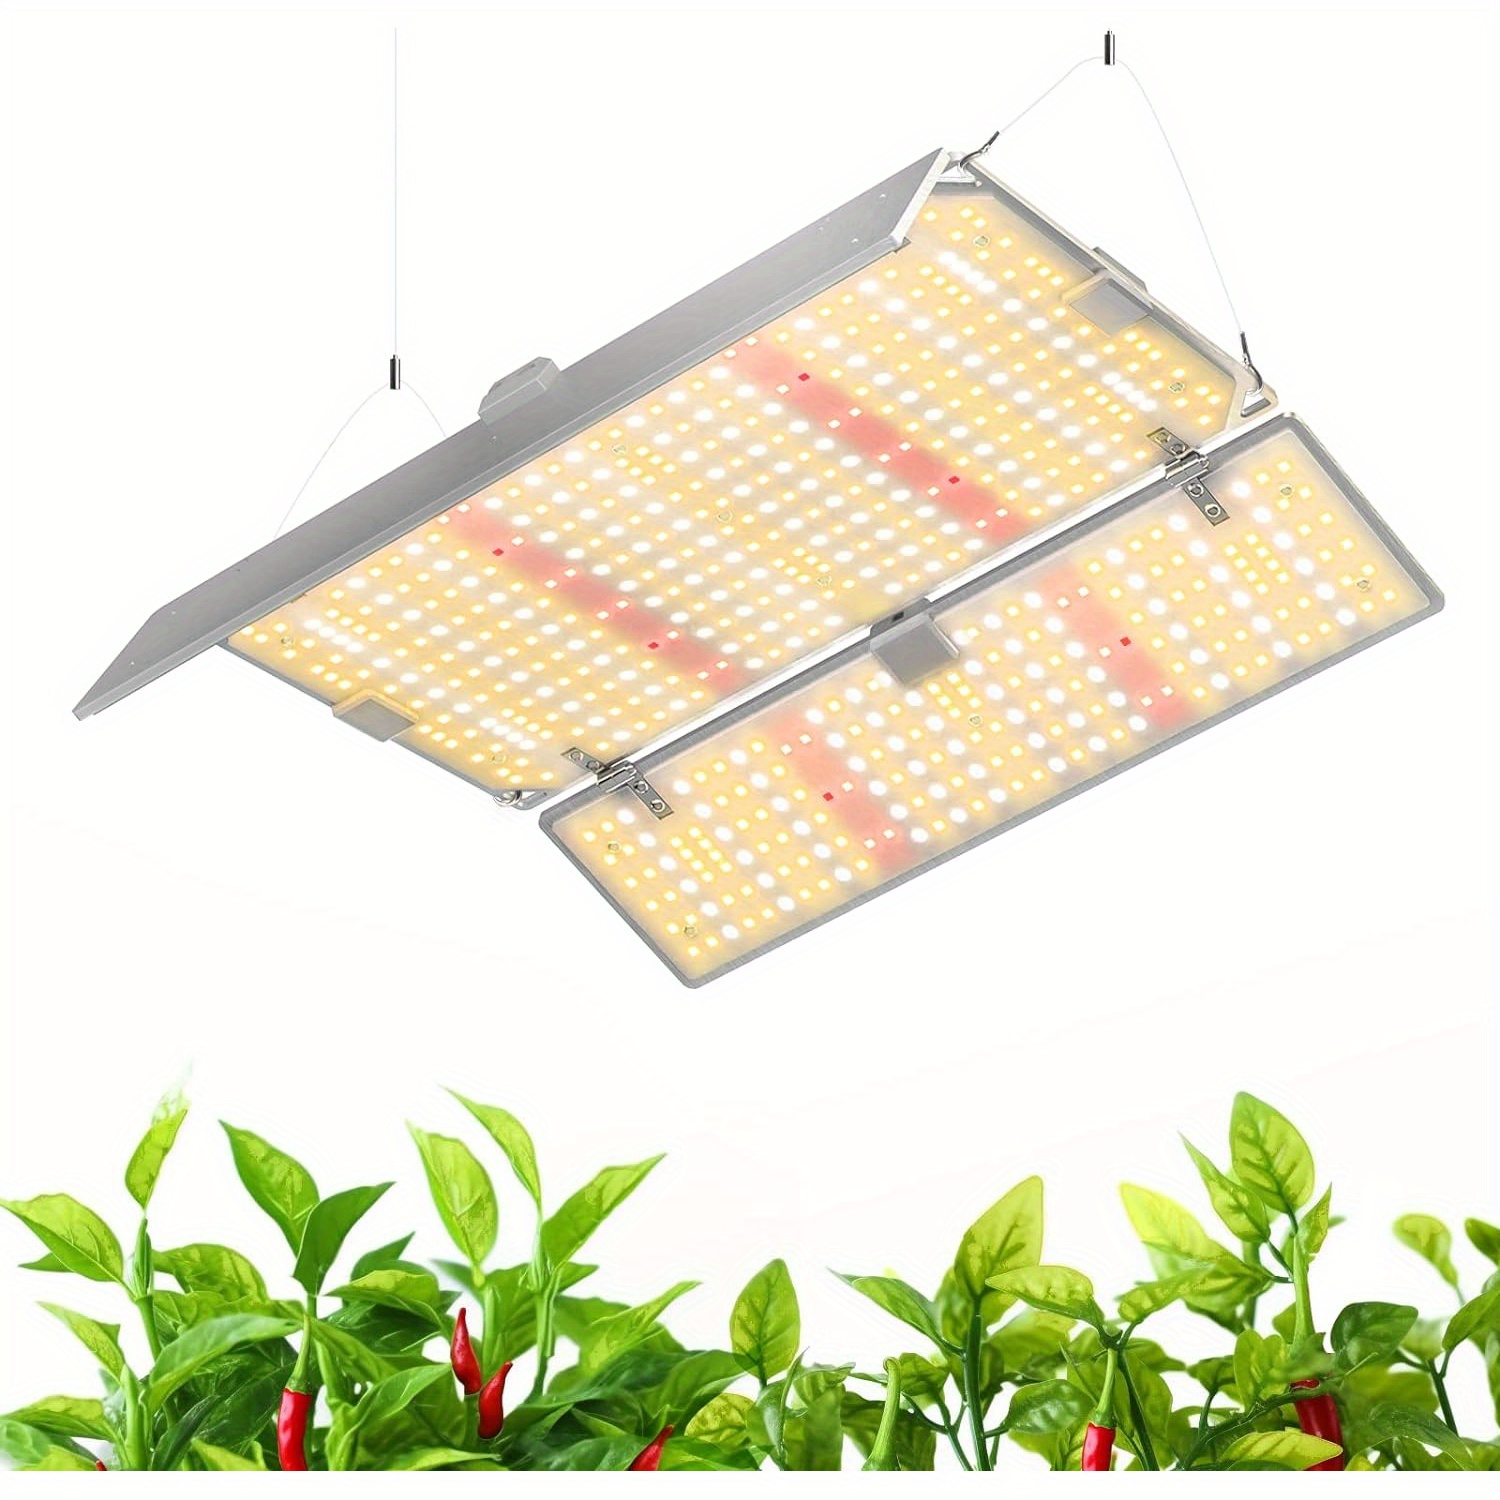 

4x4 Grow Lights For Indoor Plants Full Spectrum, Bu2000 Dimmable, Adjustable Led Grow Light Panel, 816 Leds, High Ppfd, Plant Lights For Indoor Growing, Seedling, Flowering And Fruiting